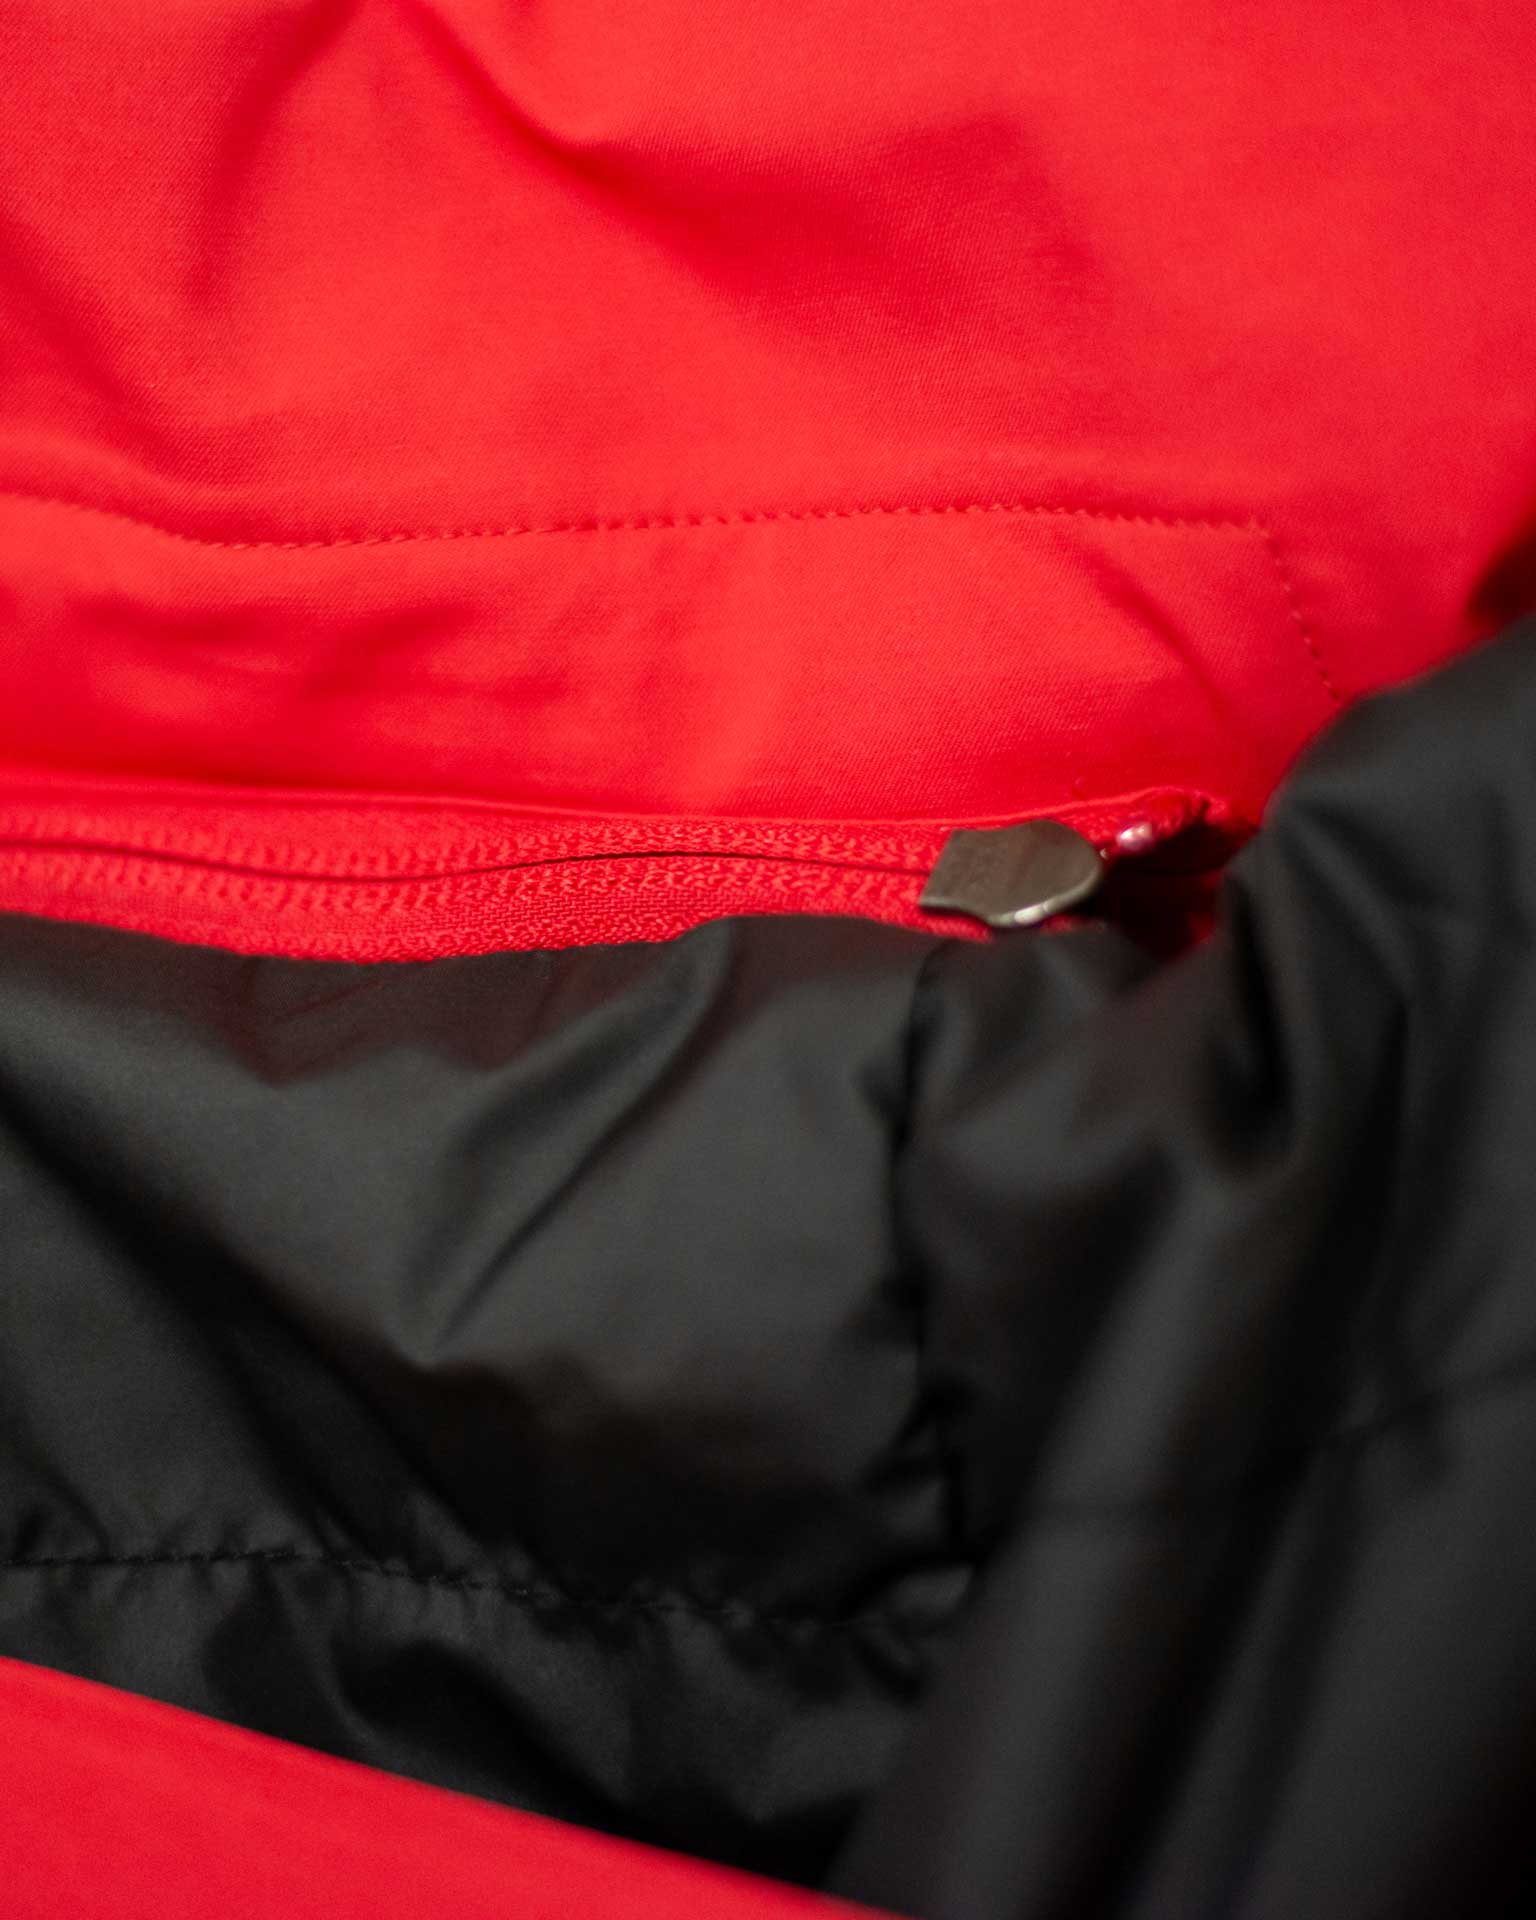 The North Face Lightweight hooded jacket in red